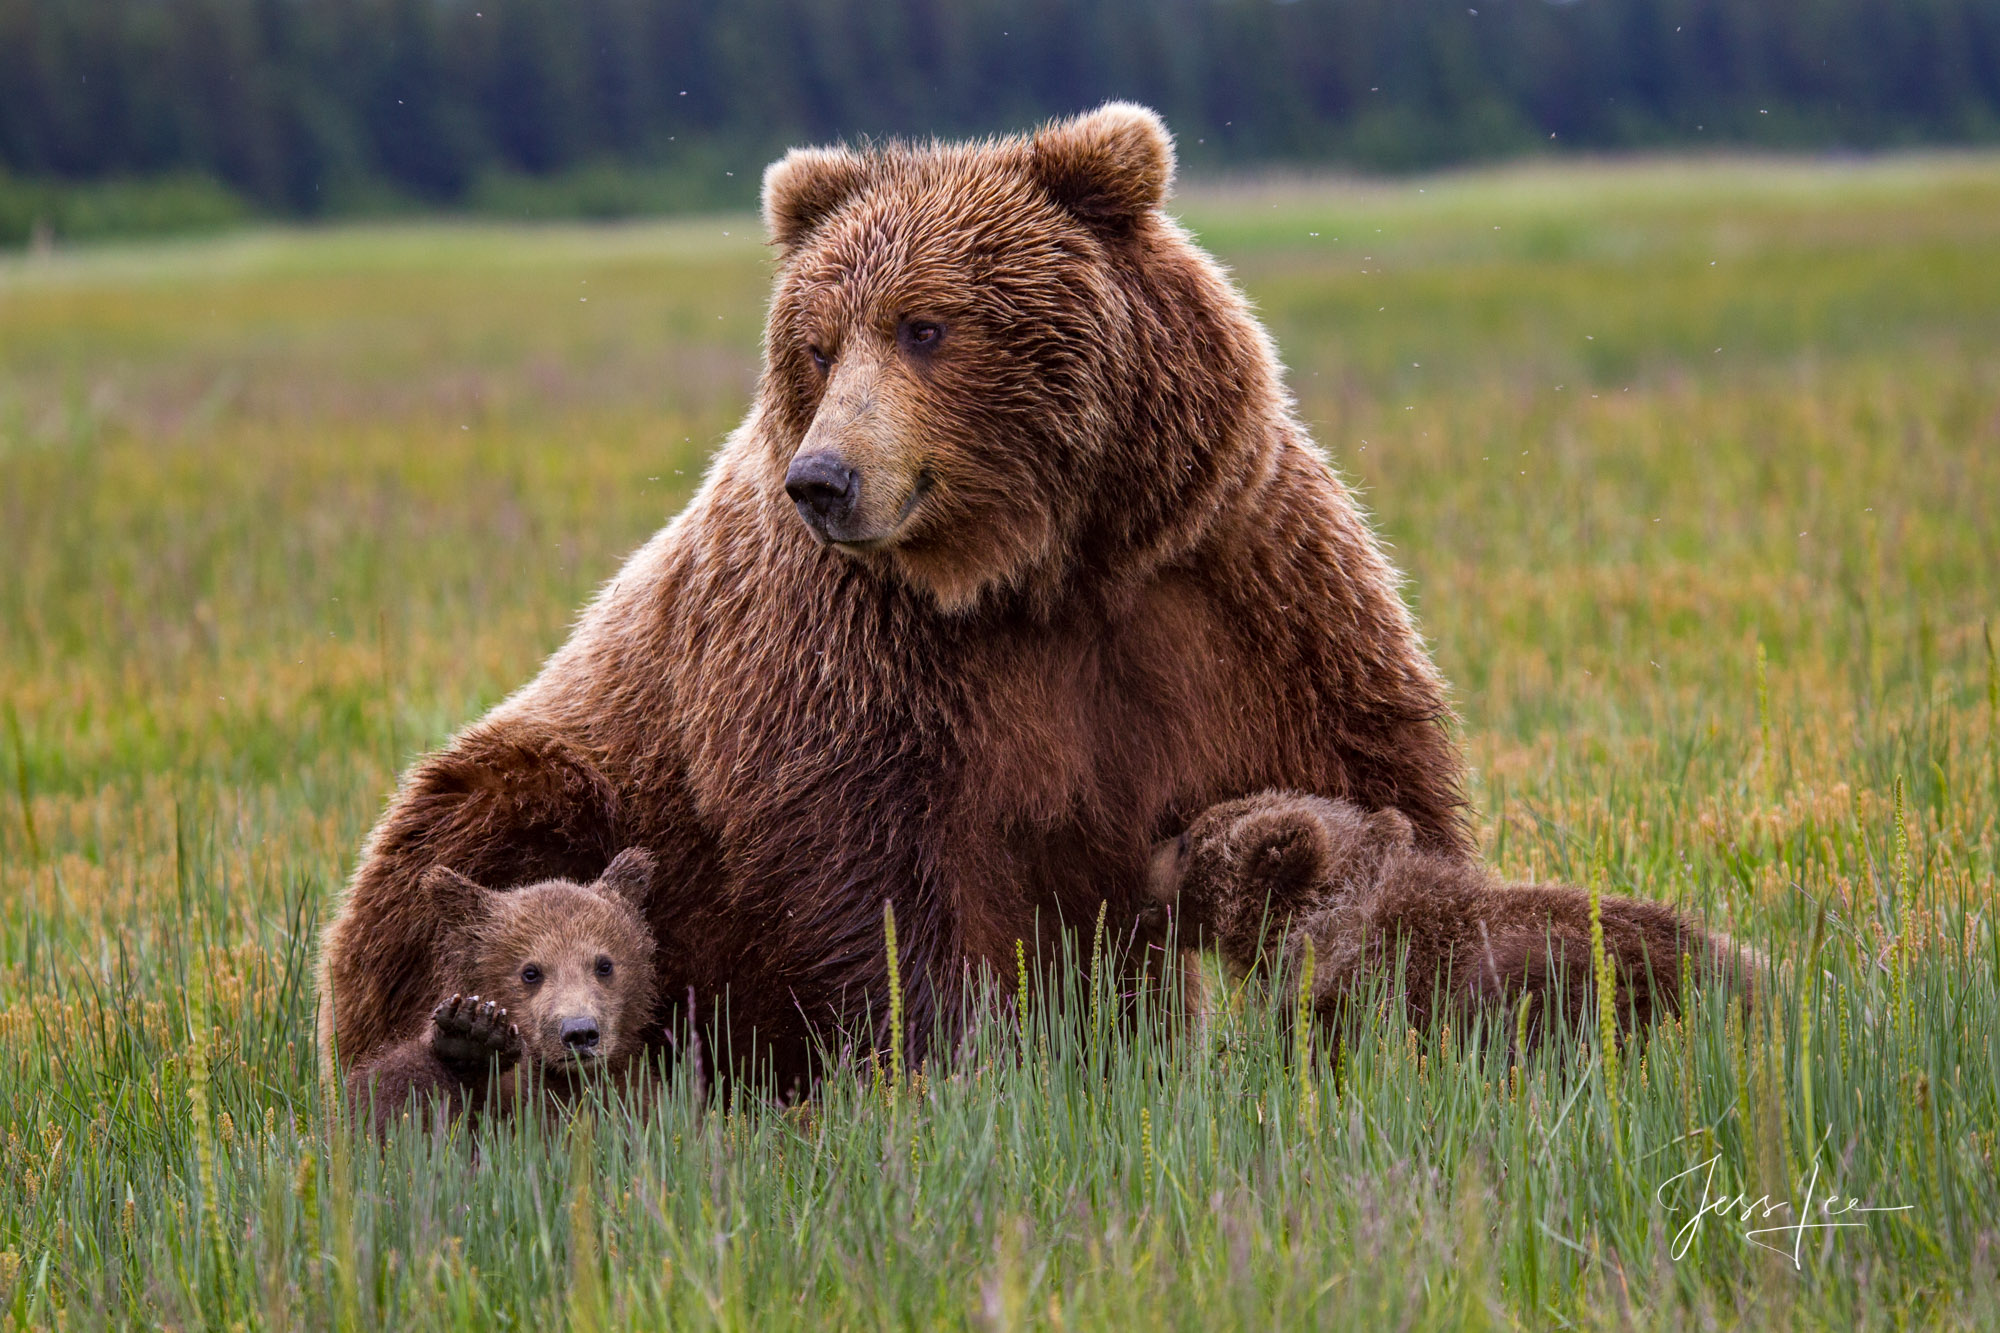 Alaska Grizzly nursing cubs. A edition of 800 prints. These Grizzly bear fine art wildlife photographs are offered as high-quality...